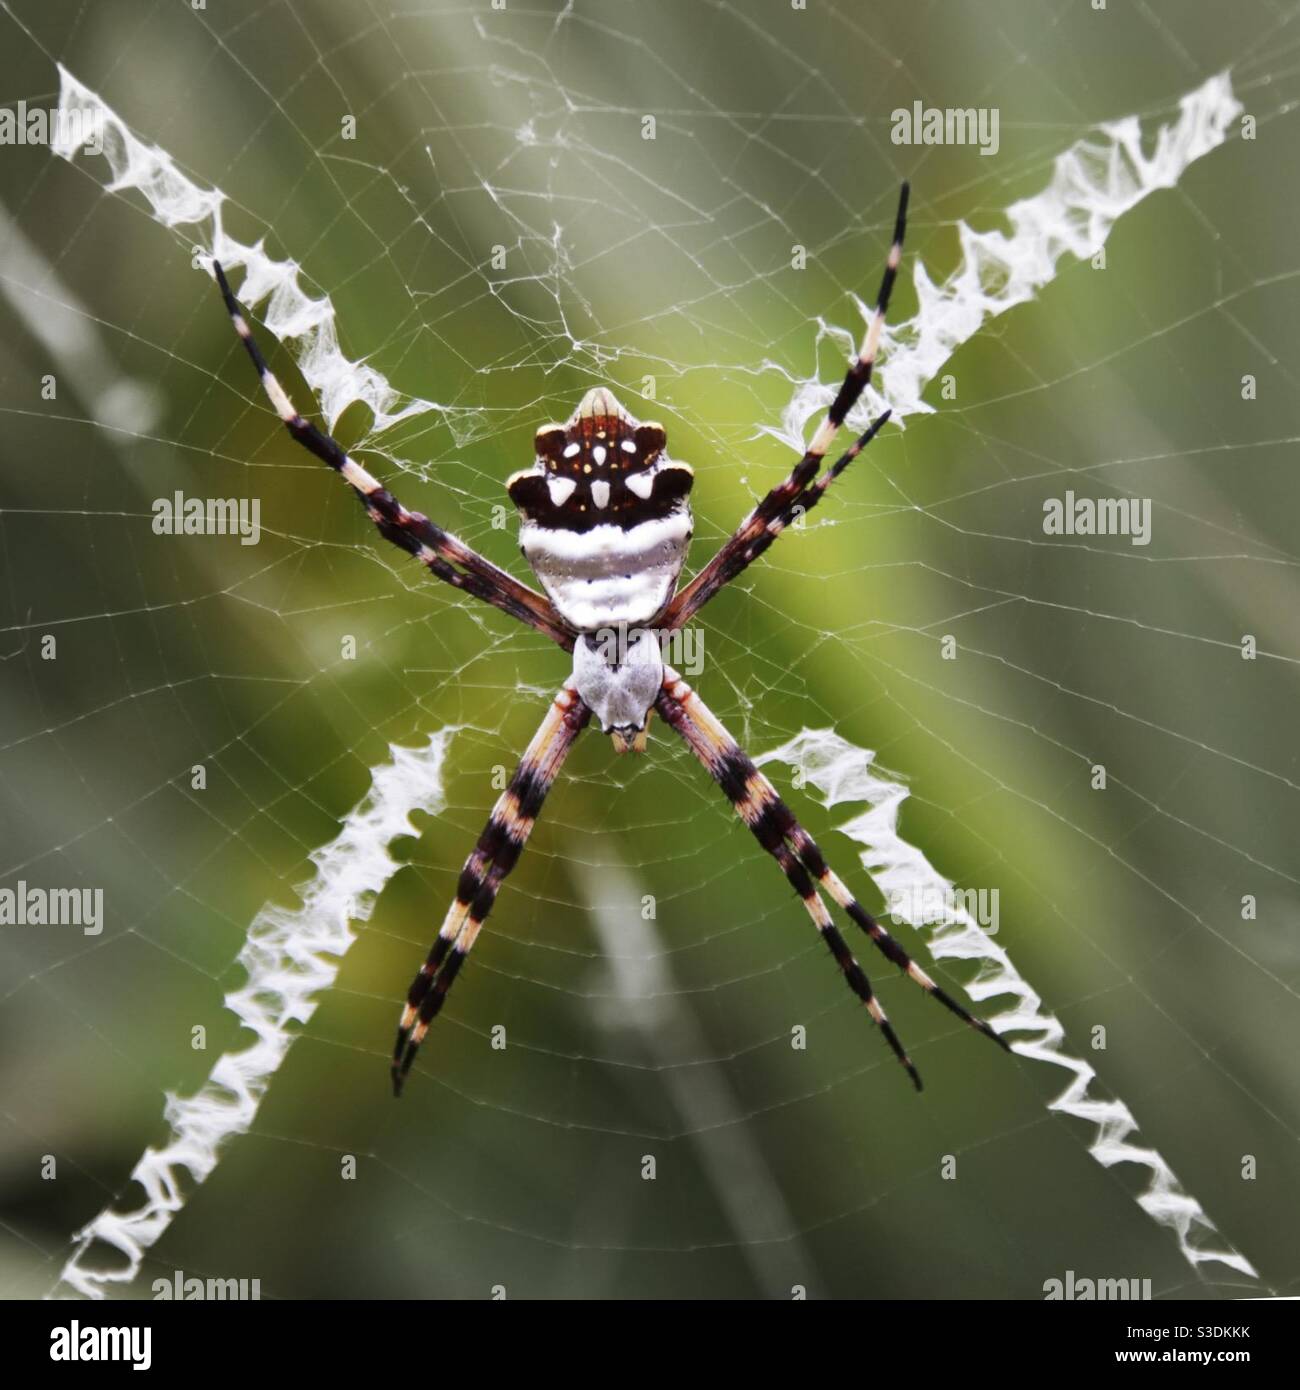 Silver argiope spider in its web Stock Photo